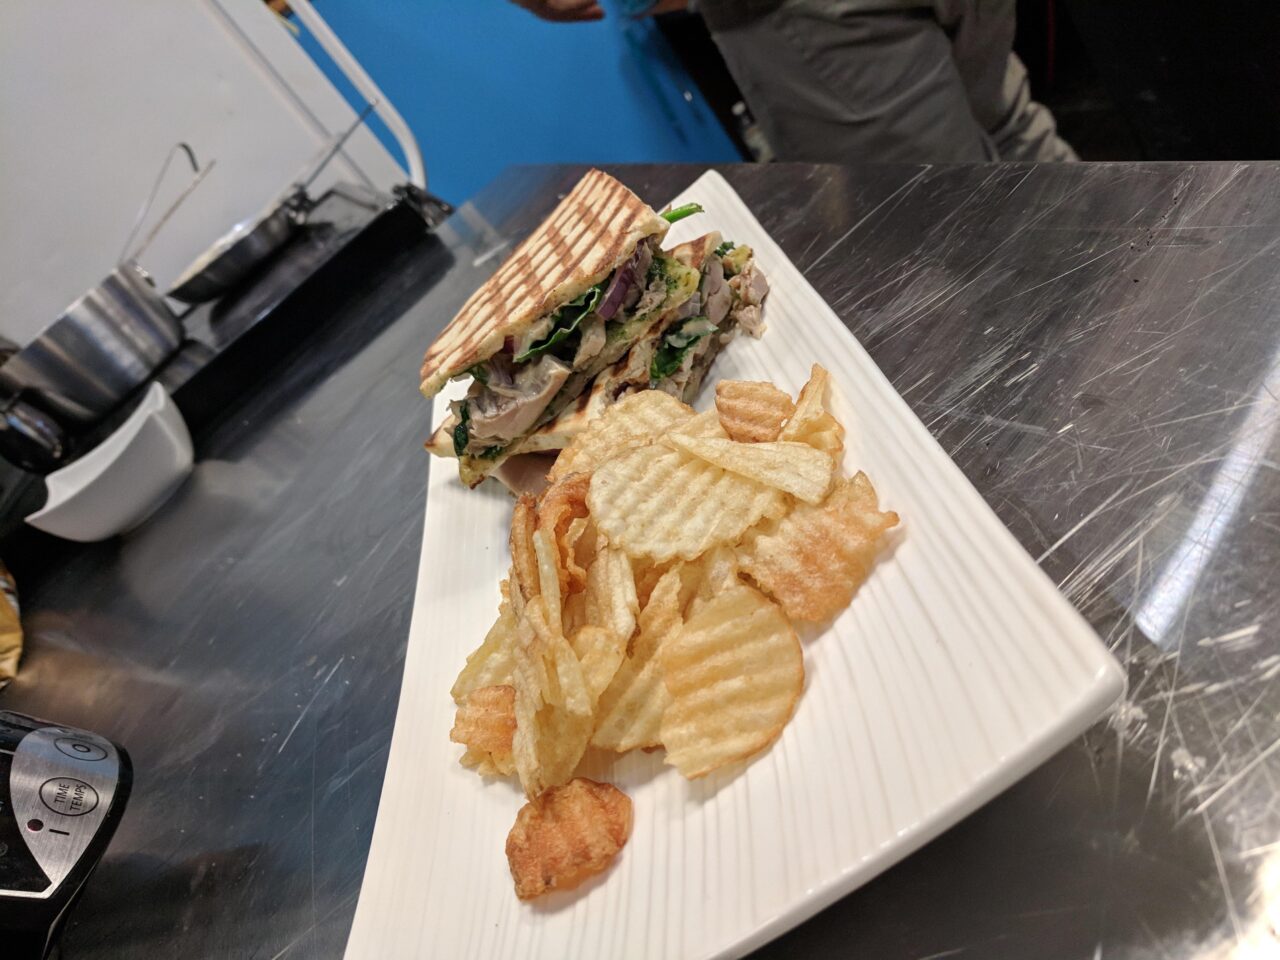 plate with sandwich and chips